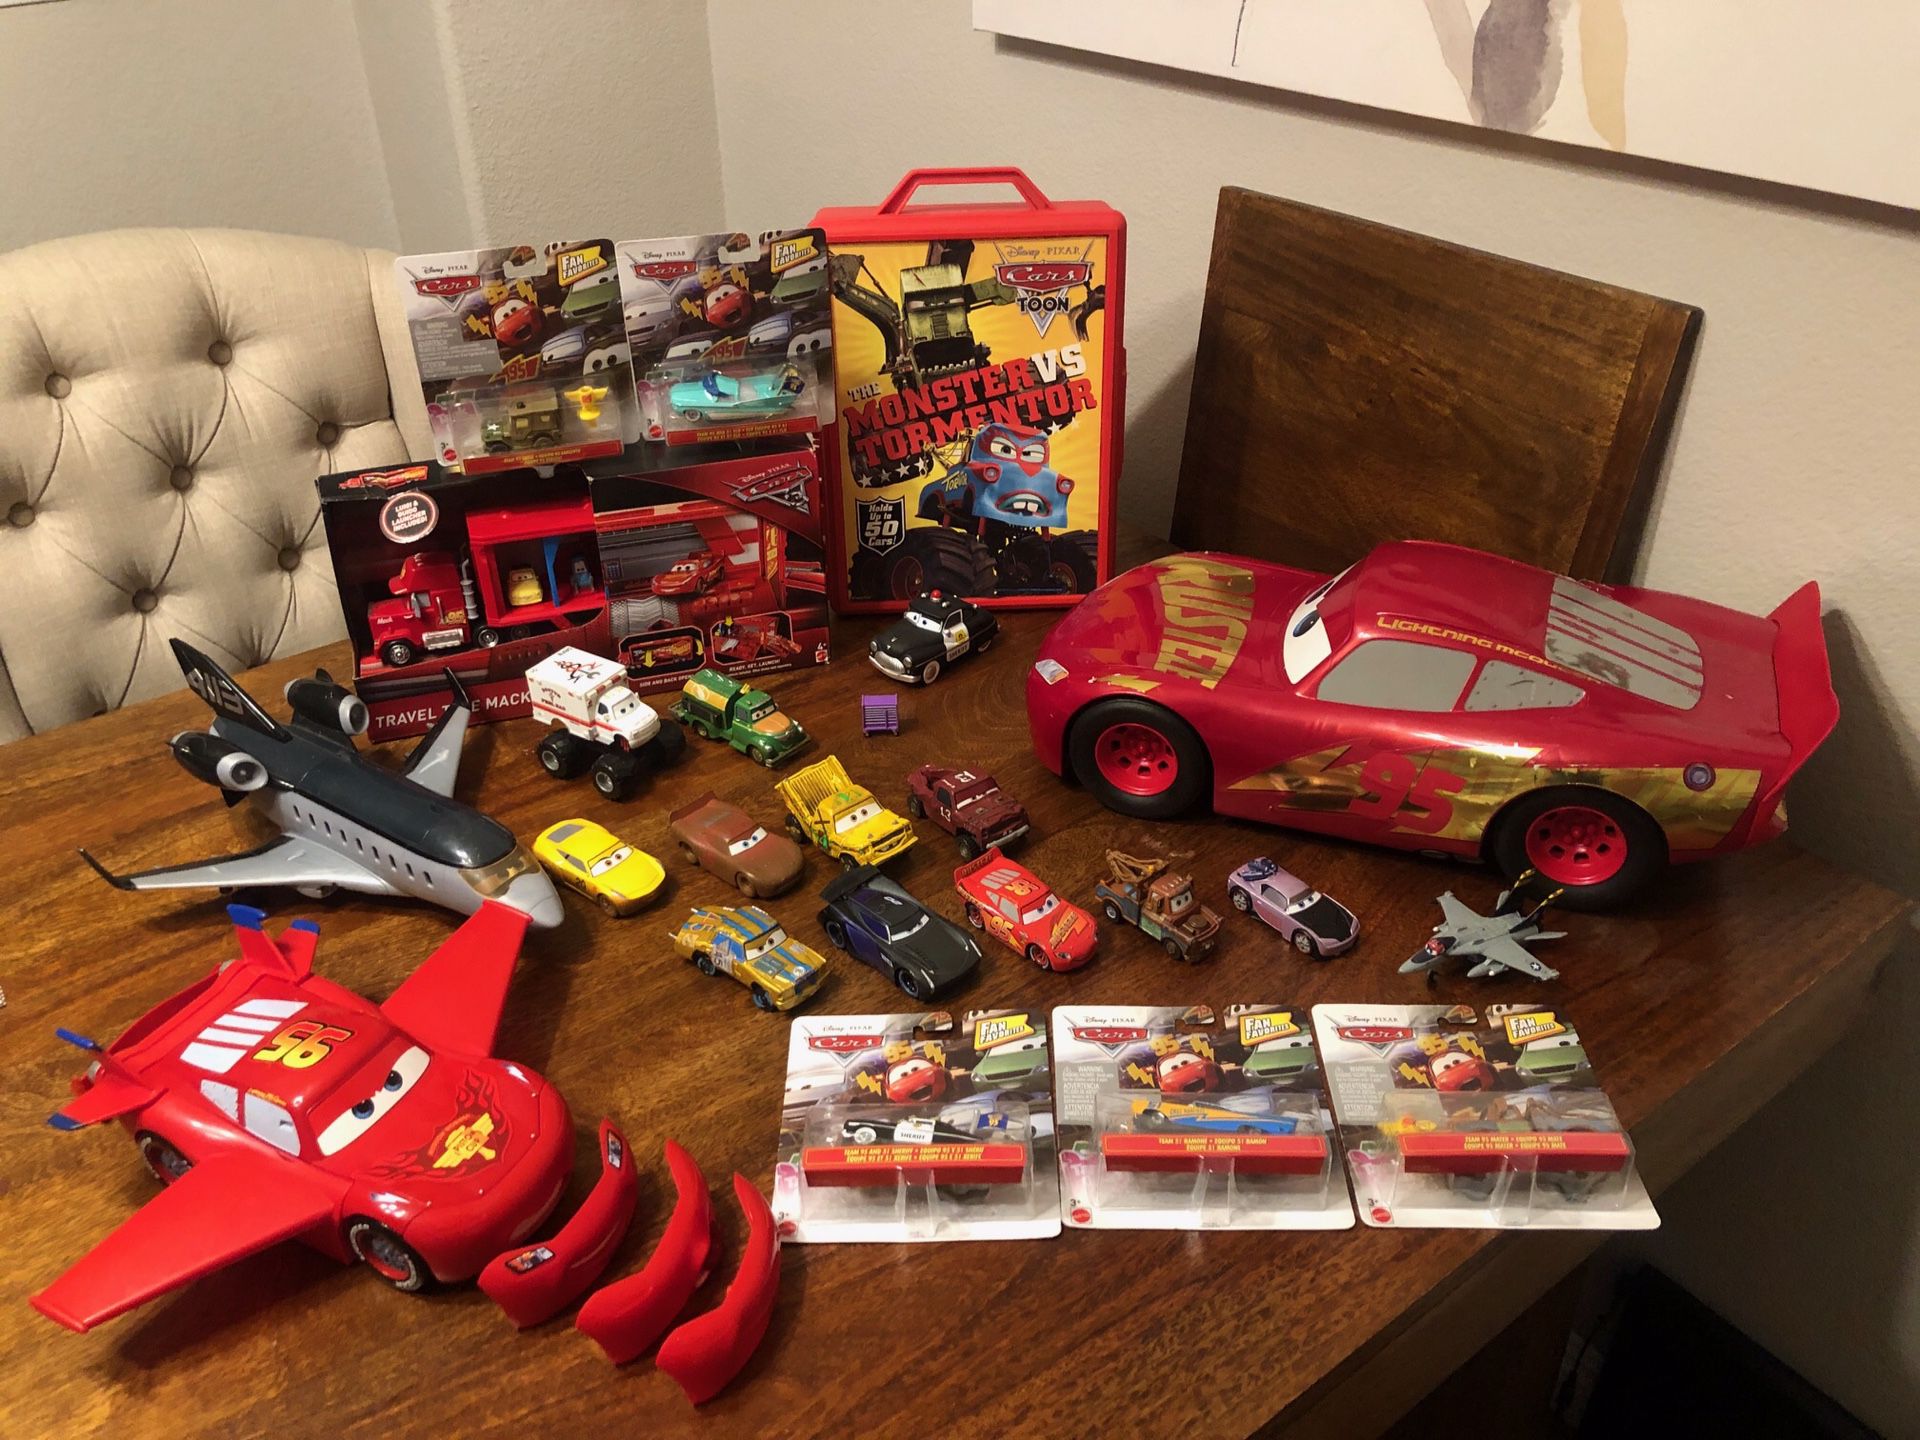 Disney Pixar Cars Lighting McQueen new and use toys awesome collection scale 1:45 good condition big car make sounds